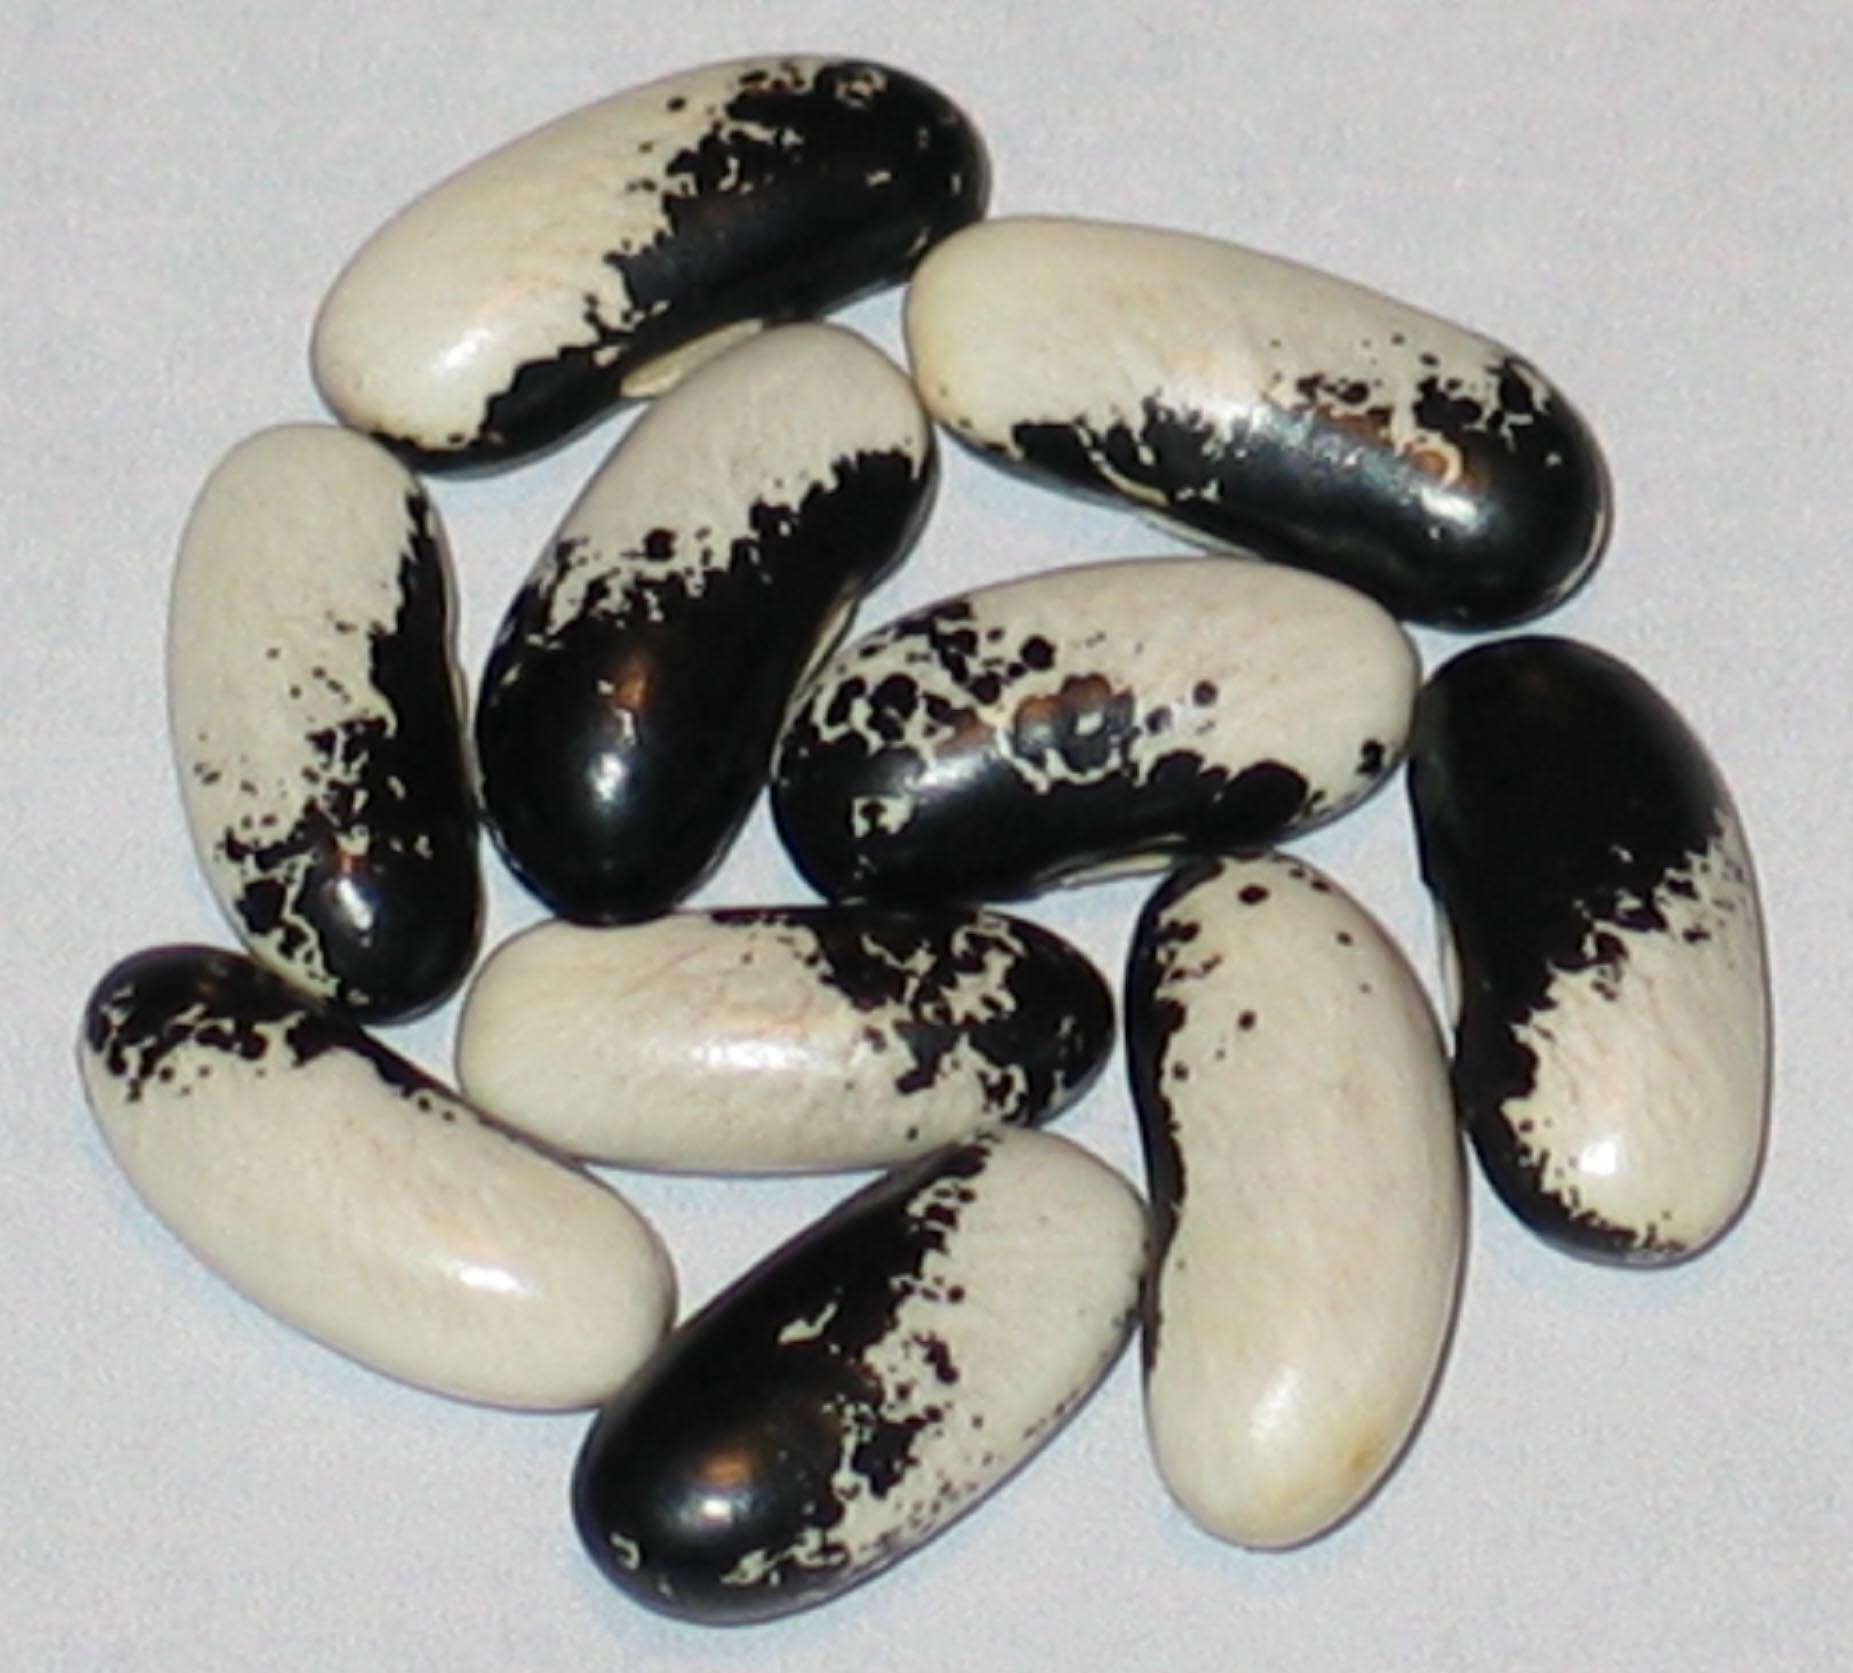 image of DH-16 beans